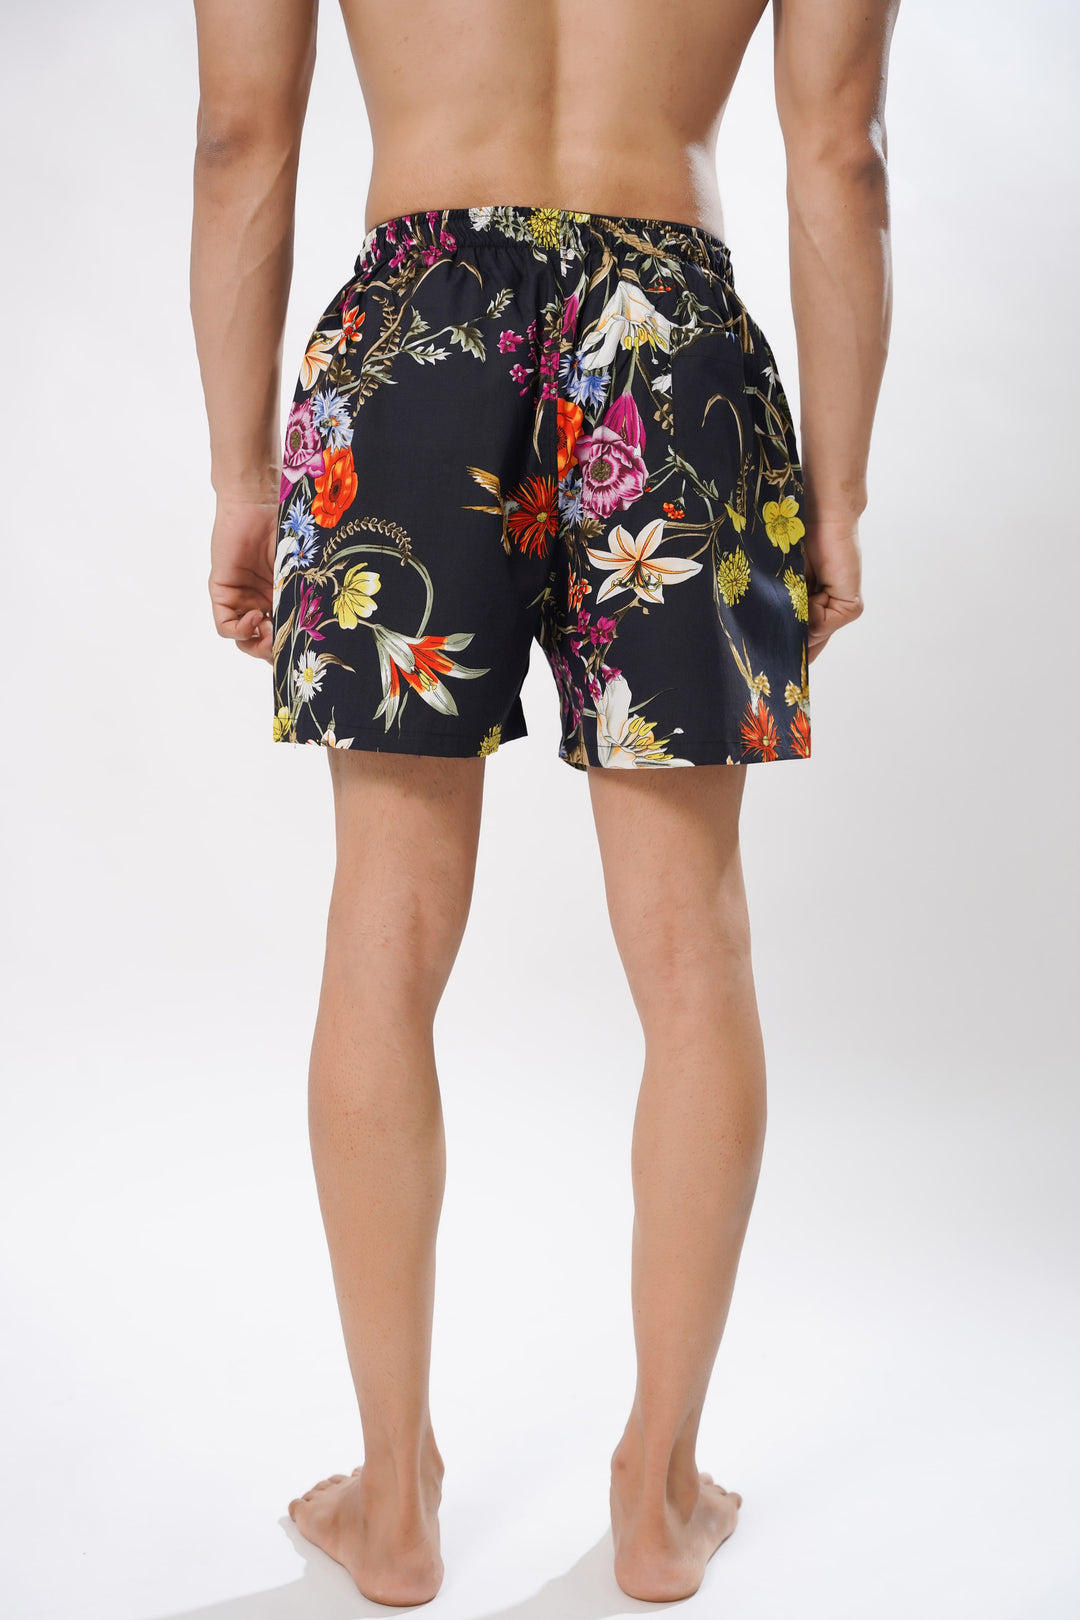 Stylish Black All-Over Printed Men's Boxers - Royaltail